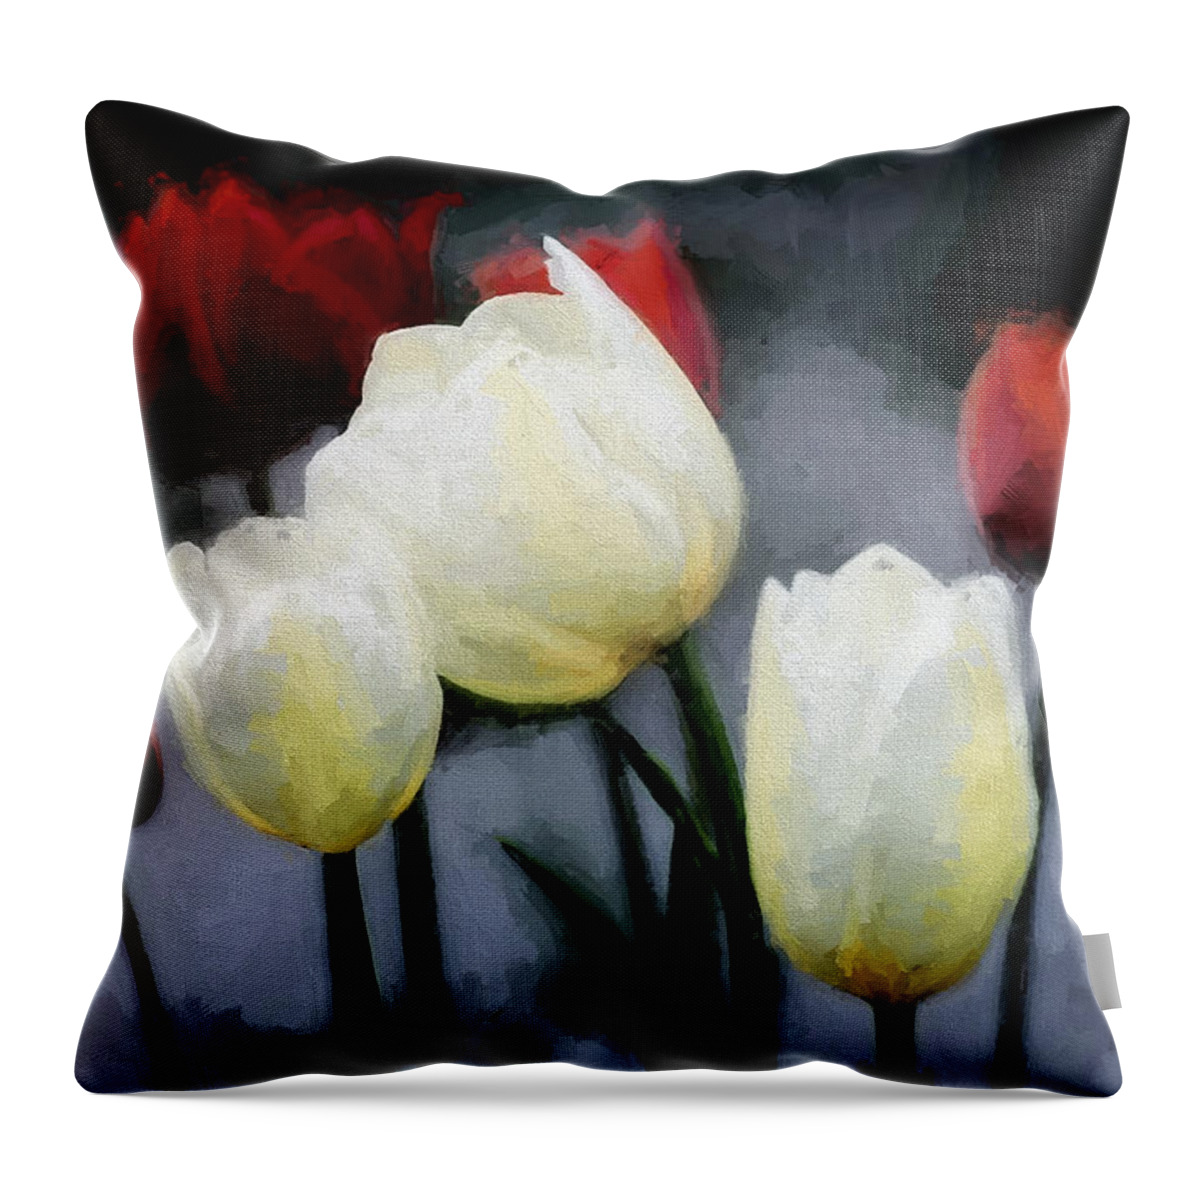 Tulips Throw Pillow featuring the digital art Tulips Digital Painting by Cathy Anderson